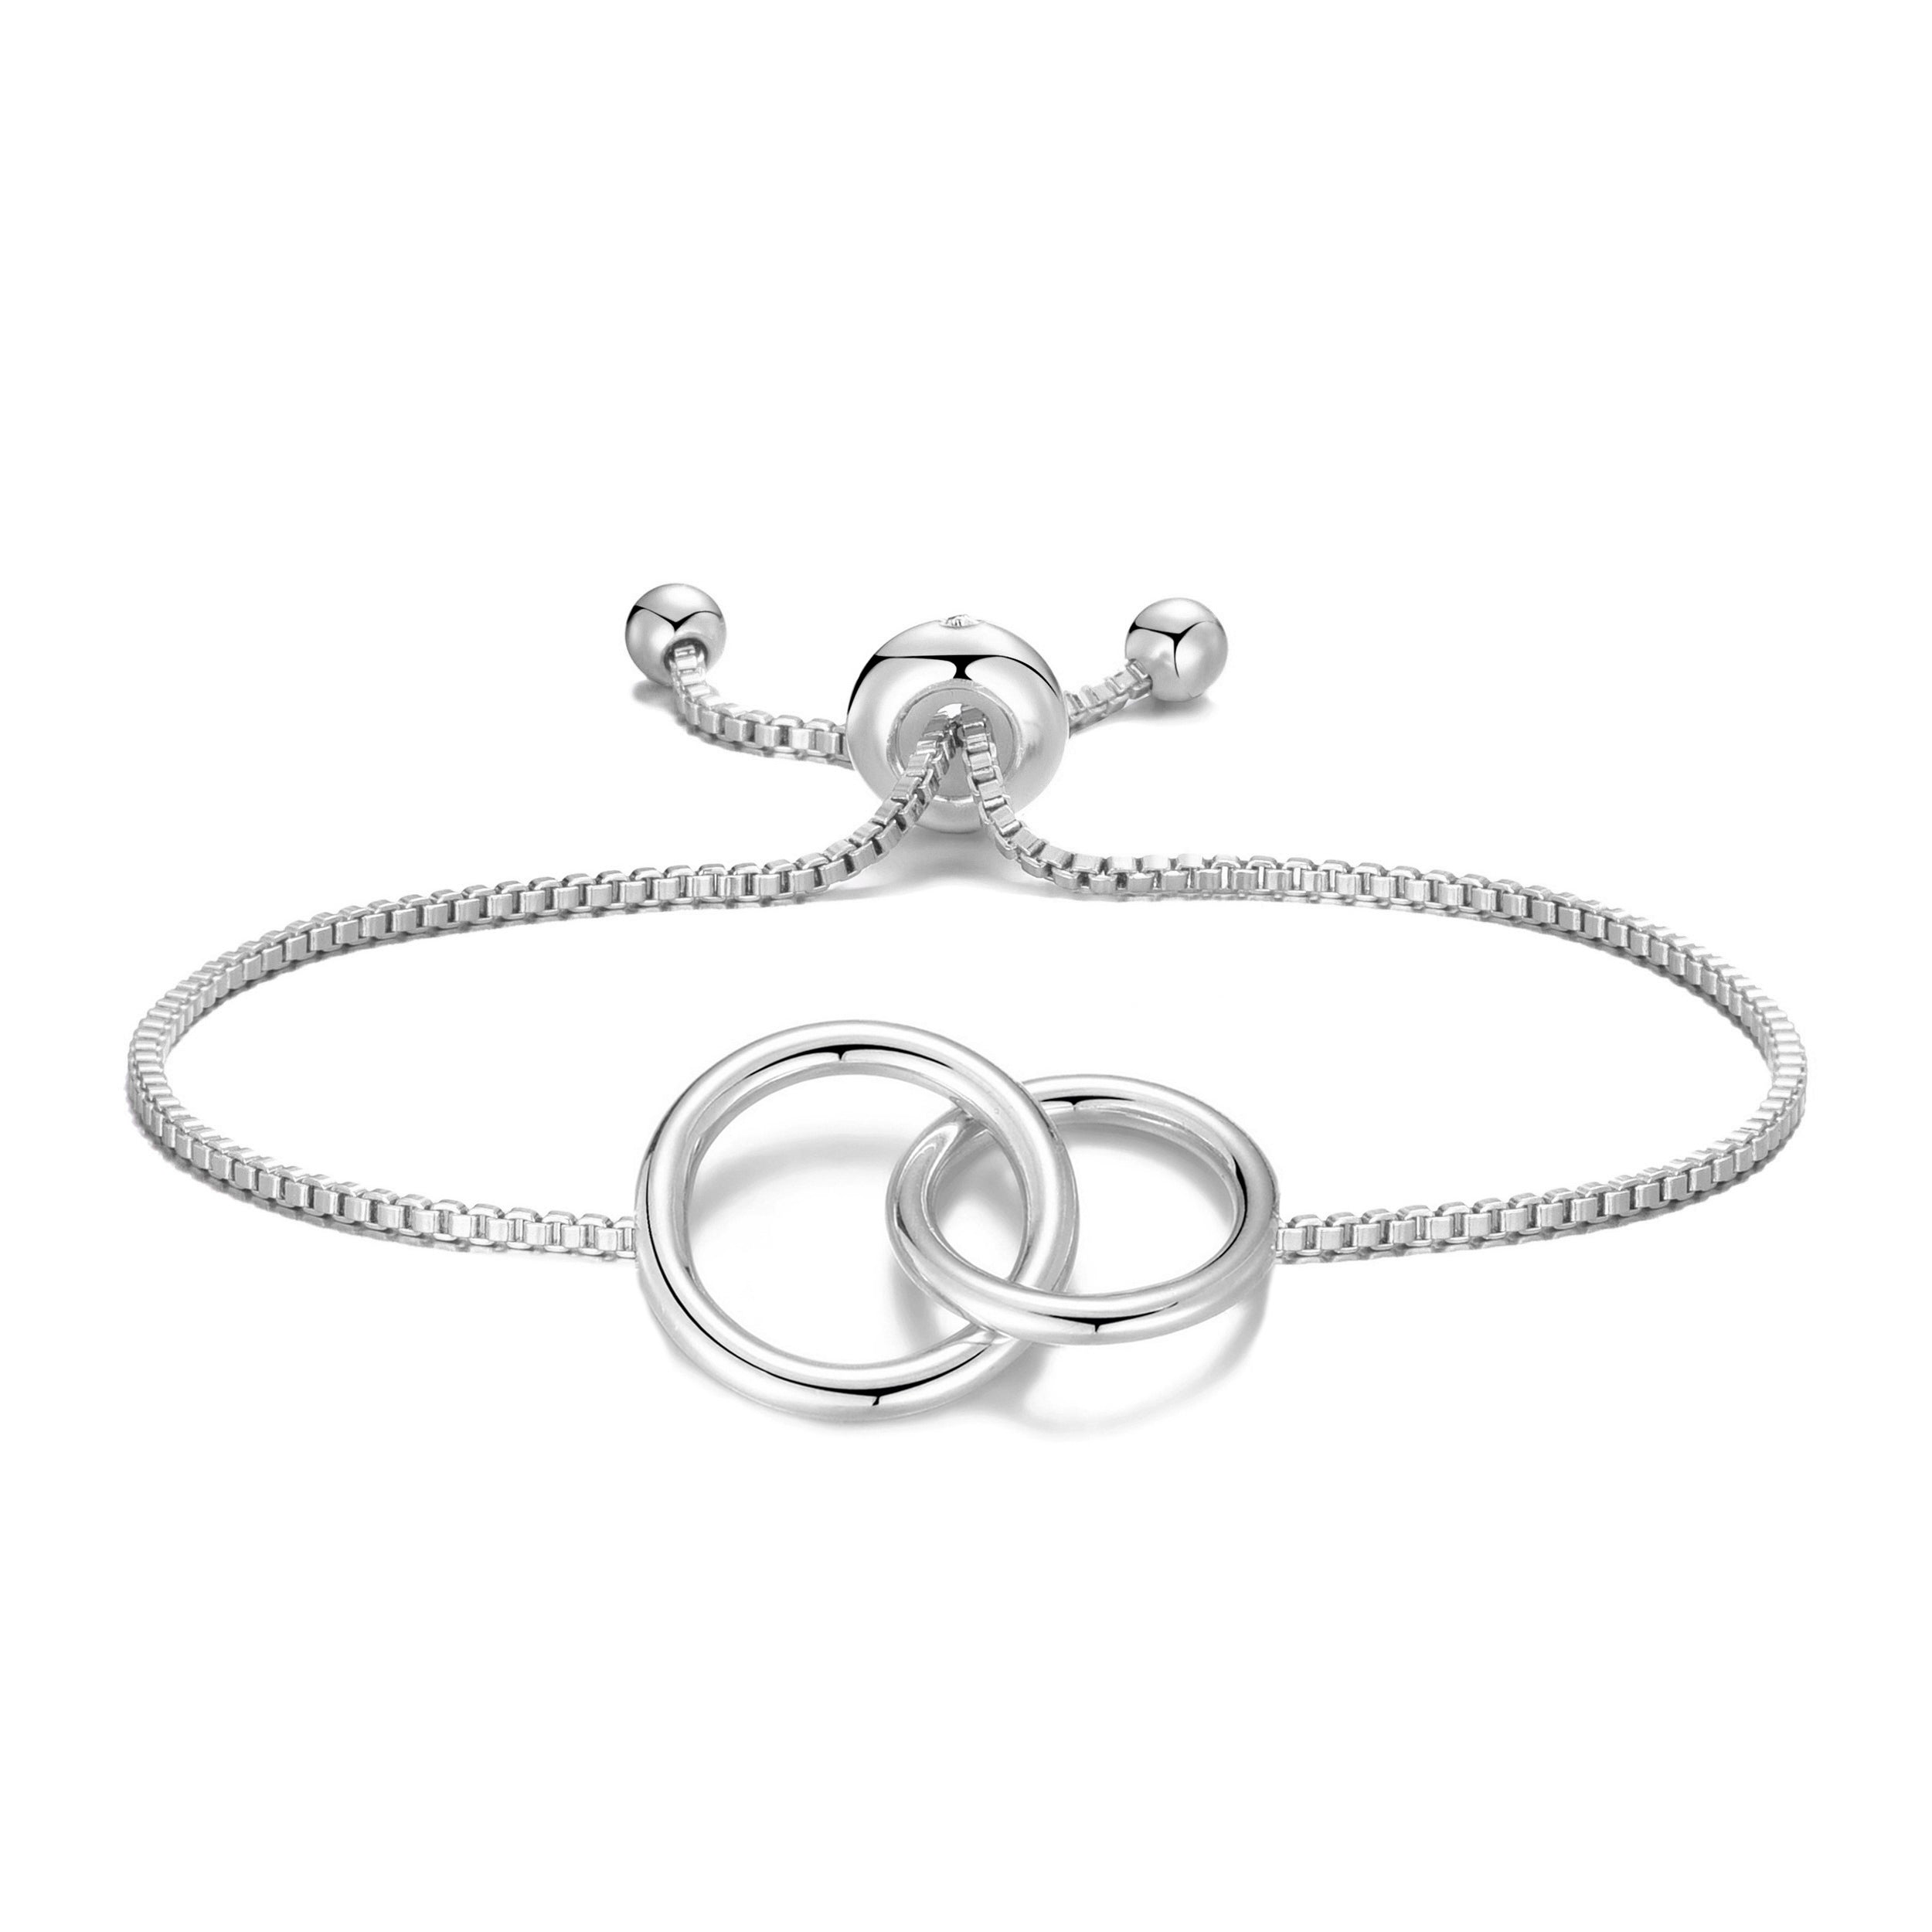 Silver Plated Link Friendship Bracelet Created with Zircondia® Crystals by Philip Jones Jewellery